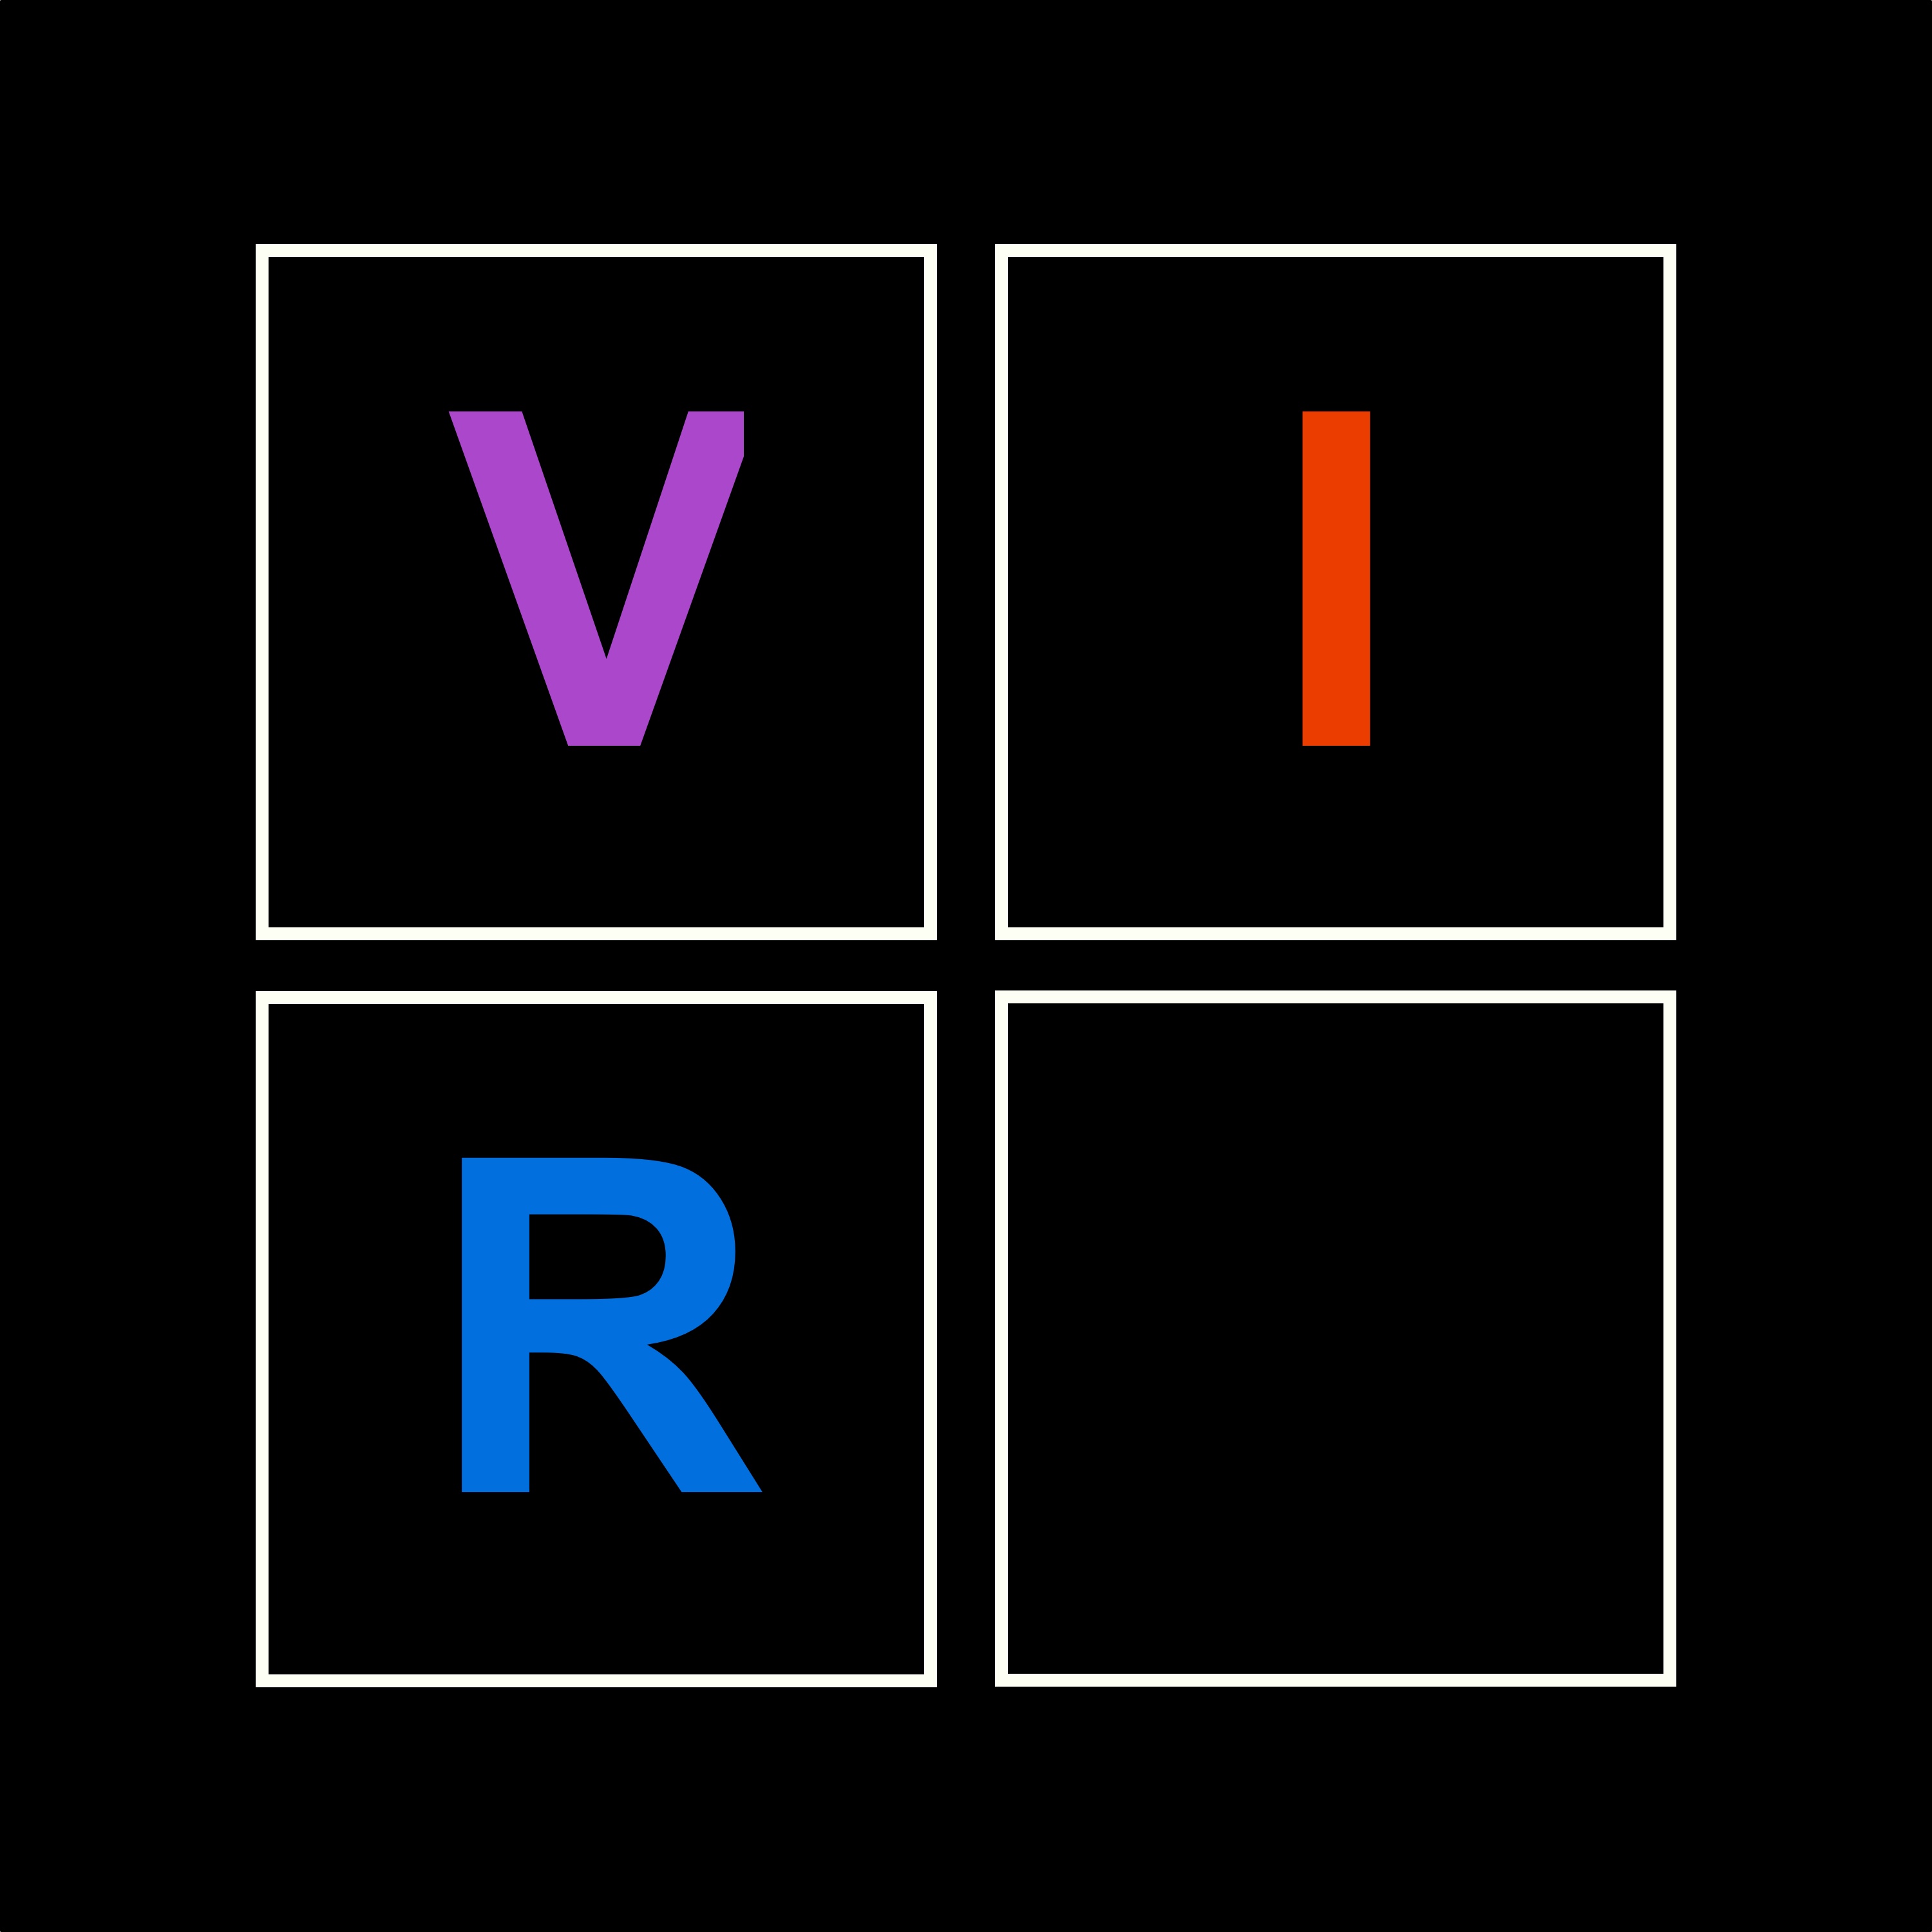 The text V I V R meant to represent the Visually Impaired Virtual Reality project